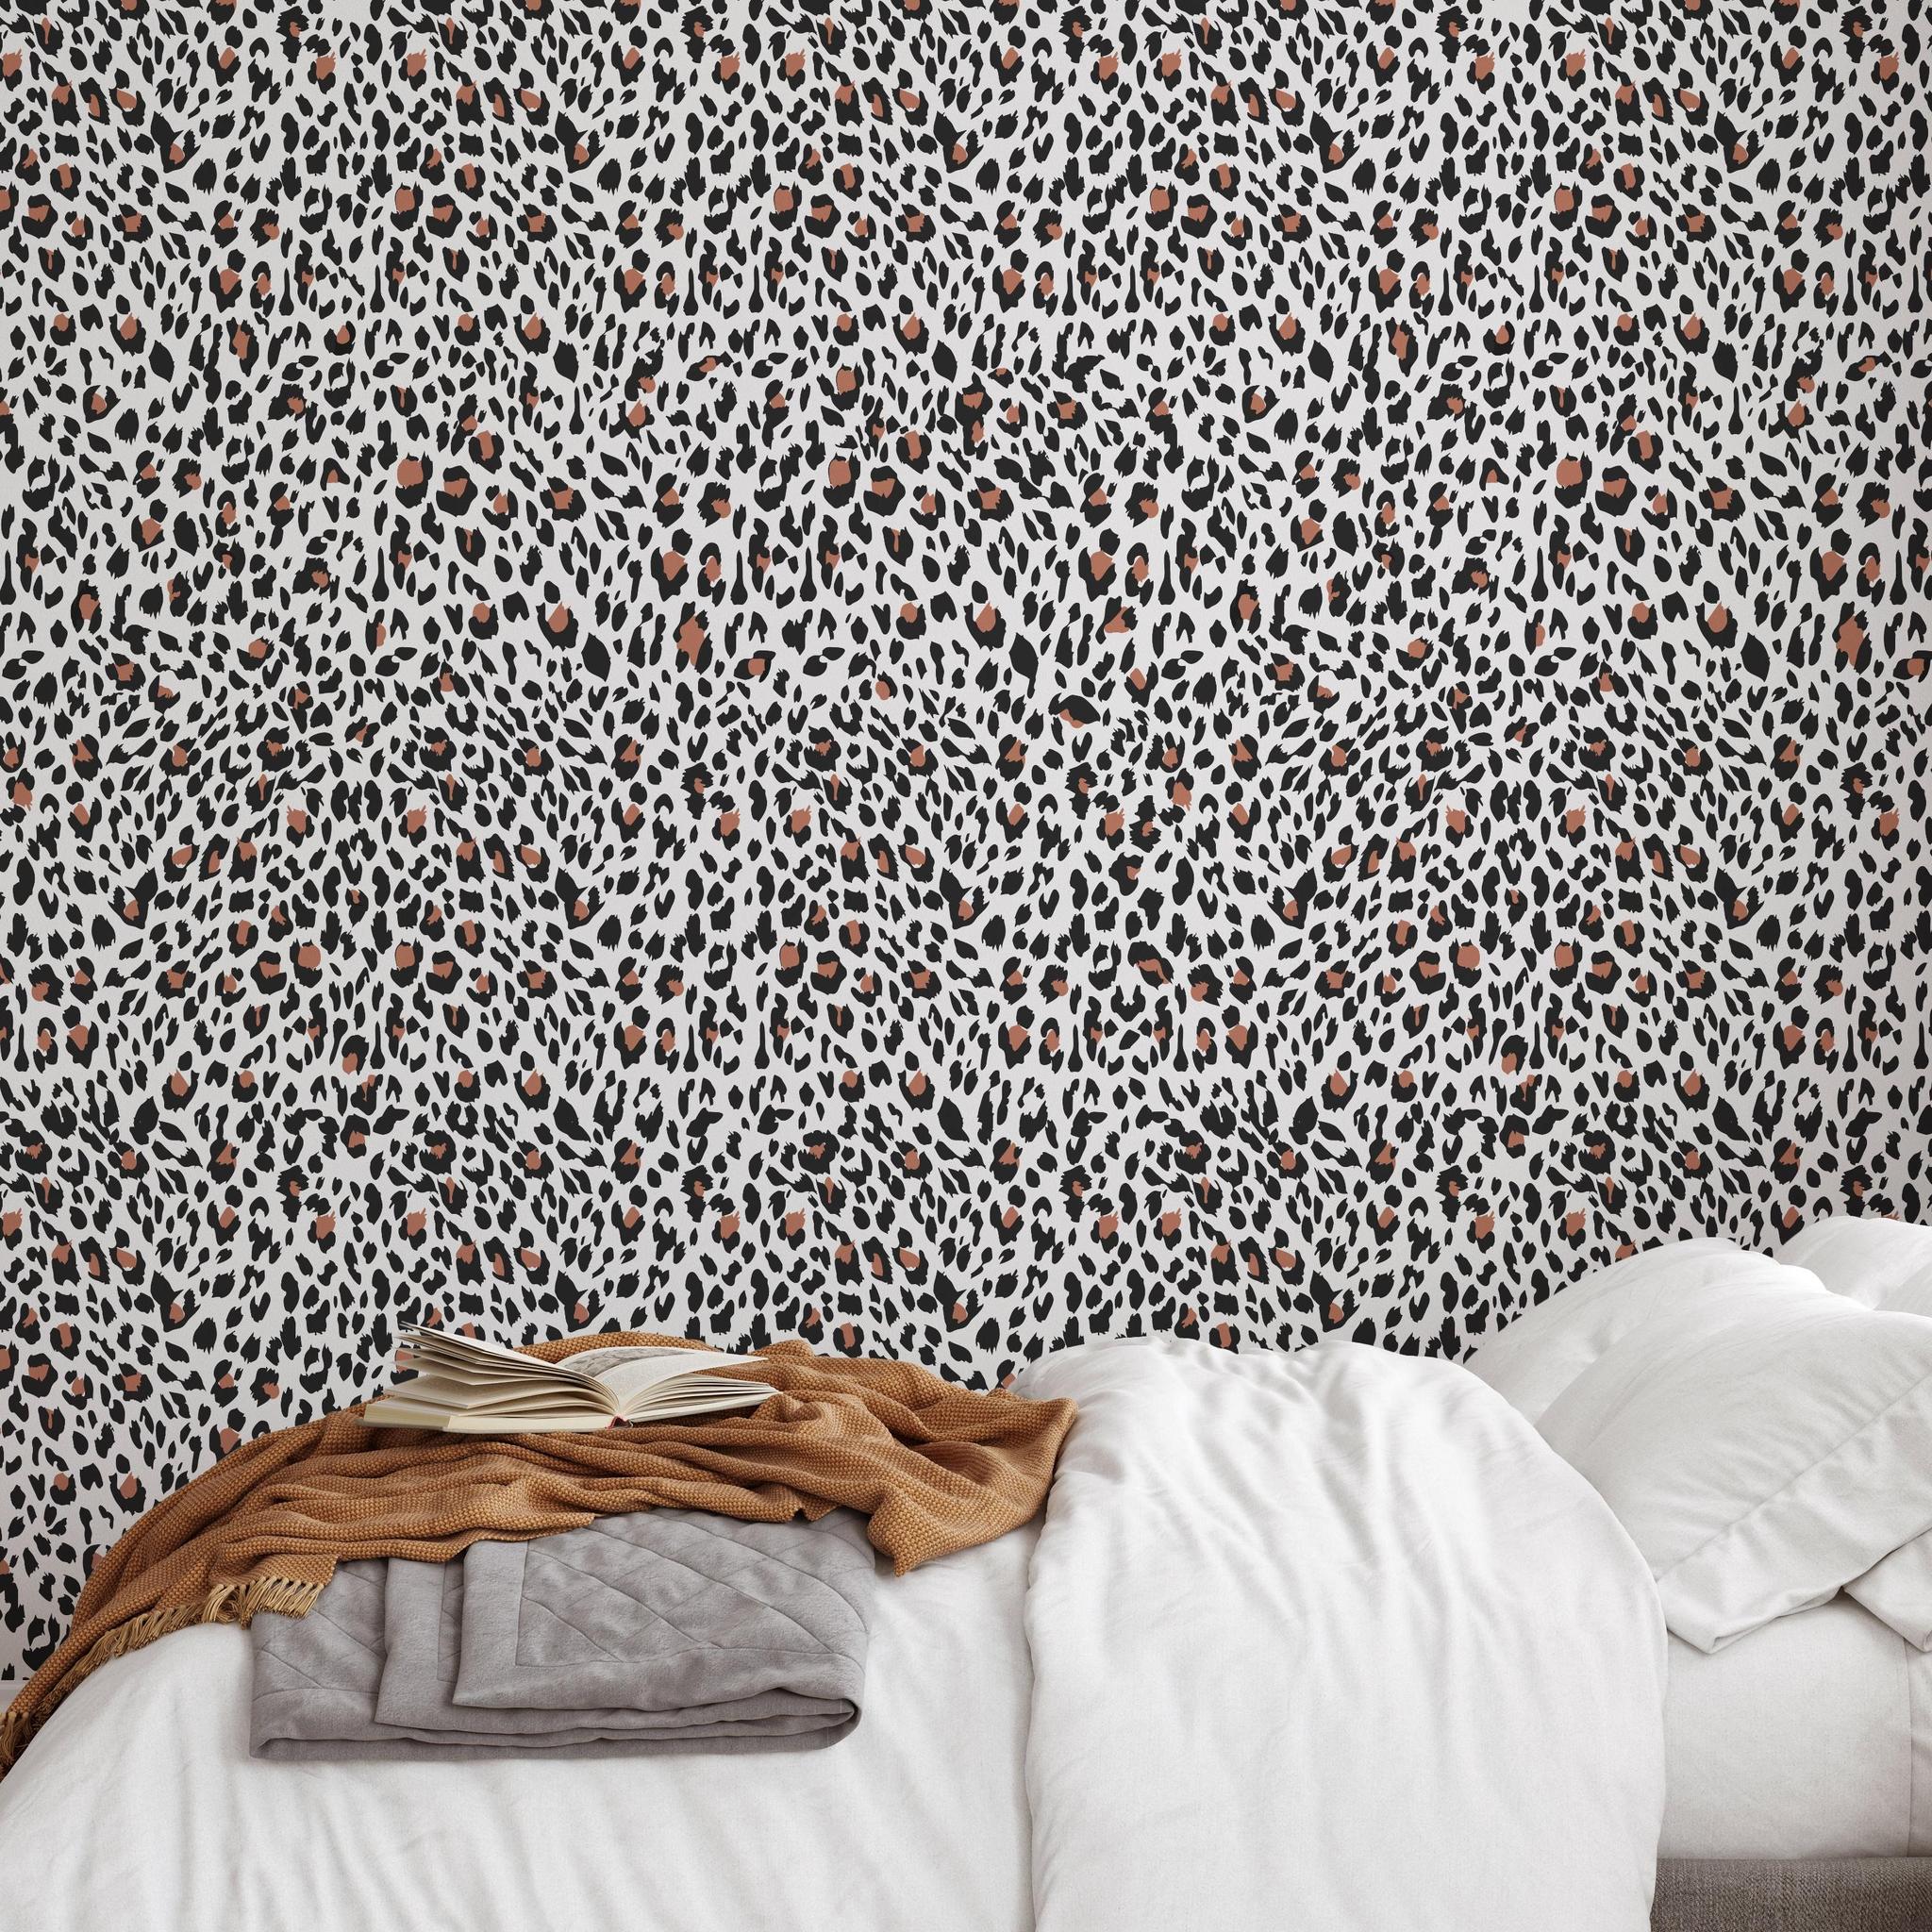 Nala Wallpaper by The Chelsea DeBoer Line featured in a stylish, cozy bedroom setting, highlighting the unique pattern.
